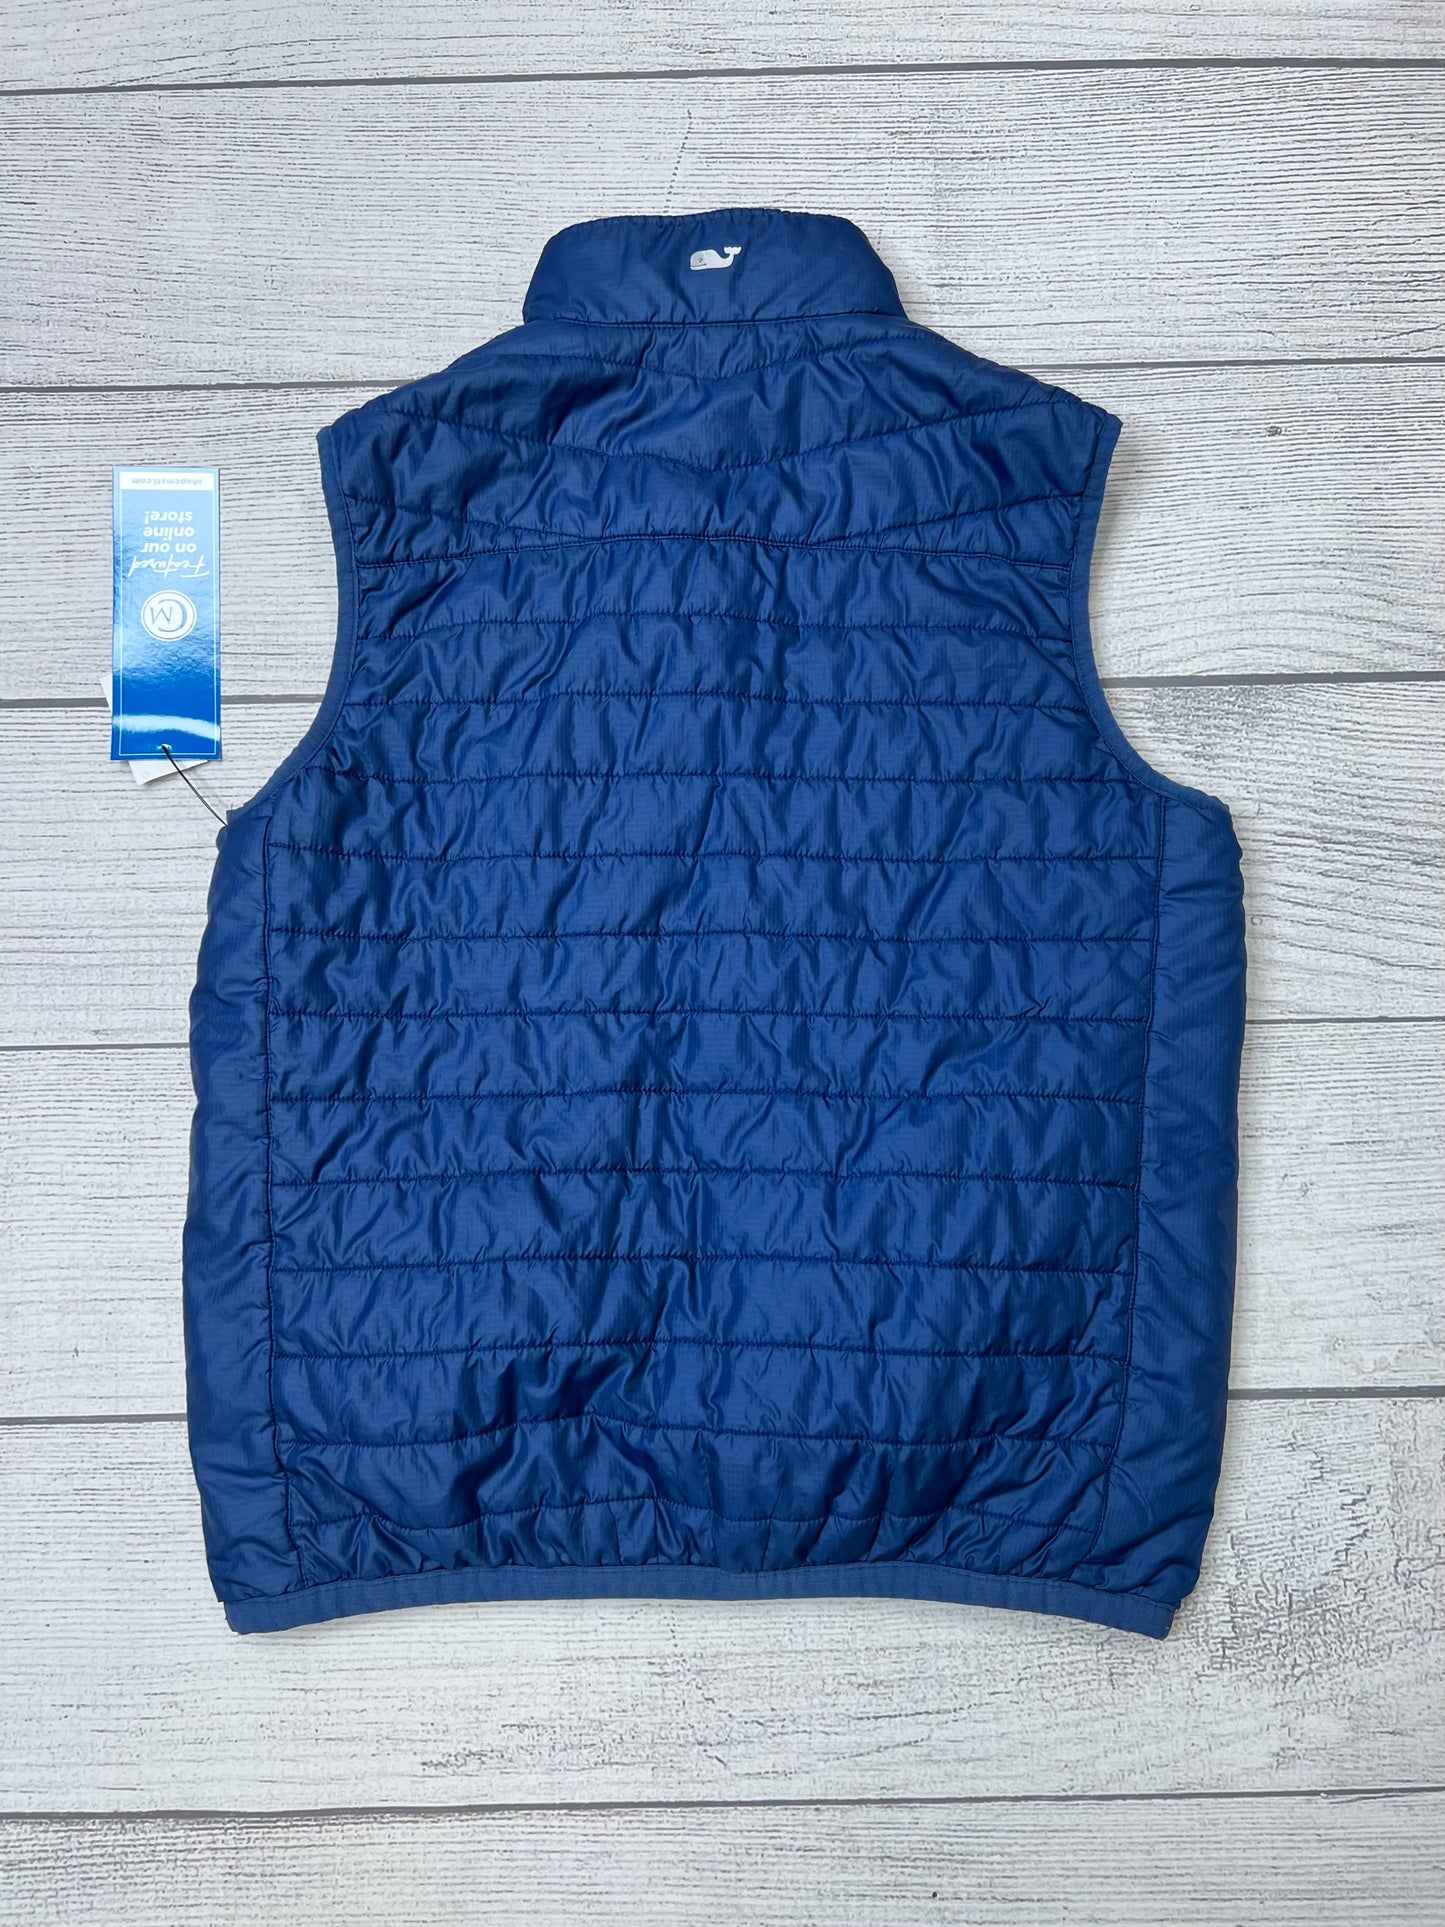 Vest Puffer & Quilted By Vineyard Vines  Size: Xs